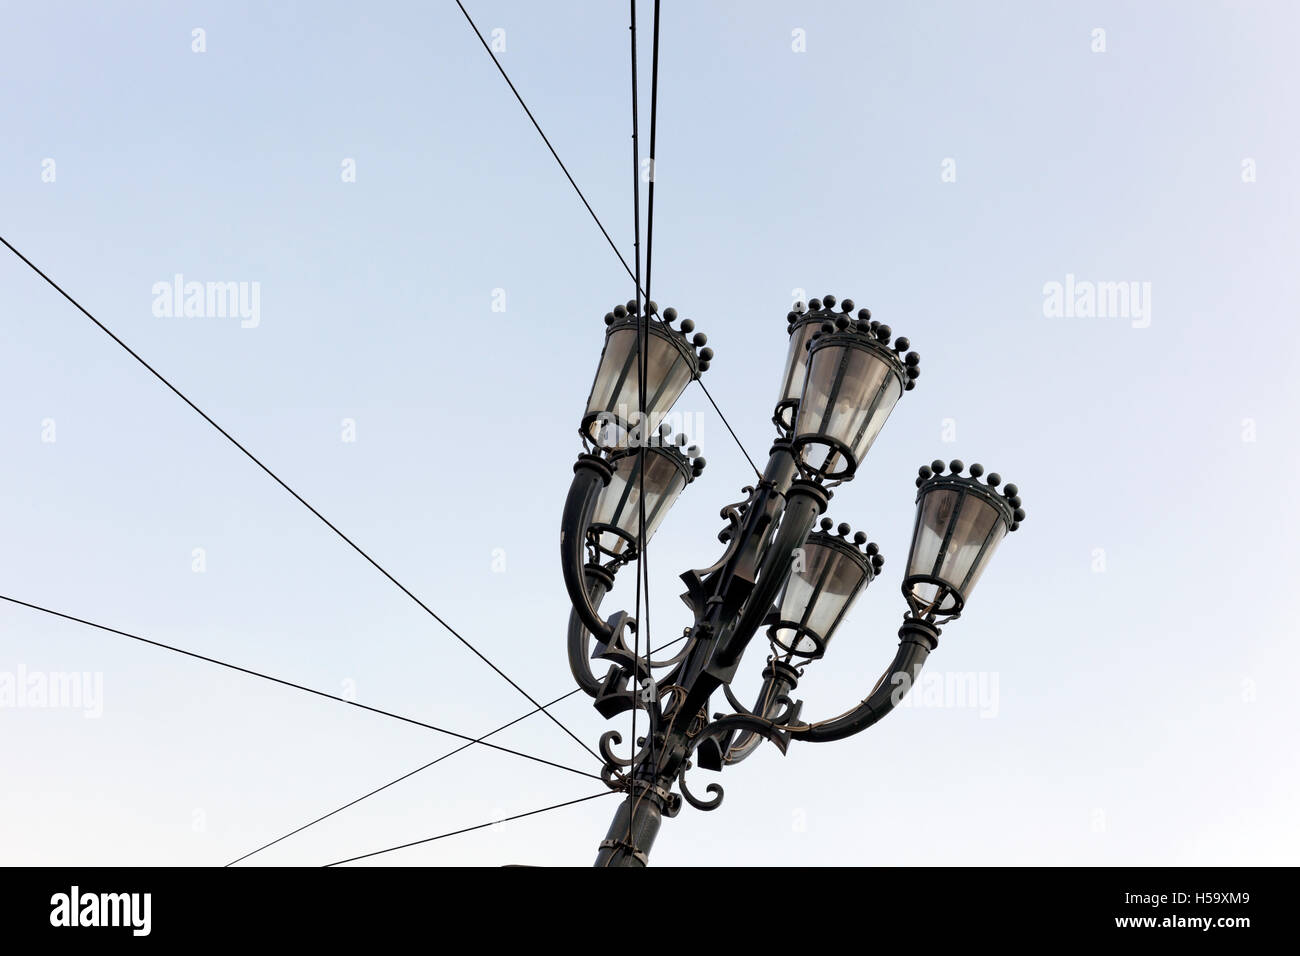 Overhead  light and cables,Turin,Italy Stock Photo